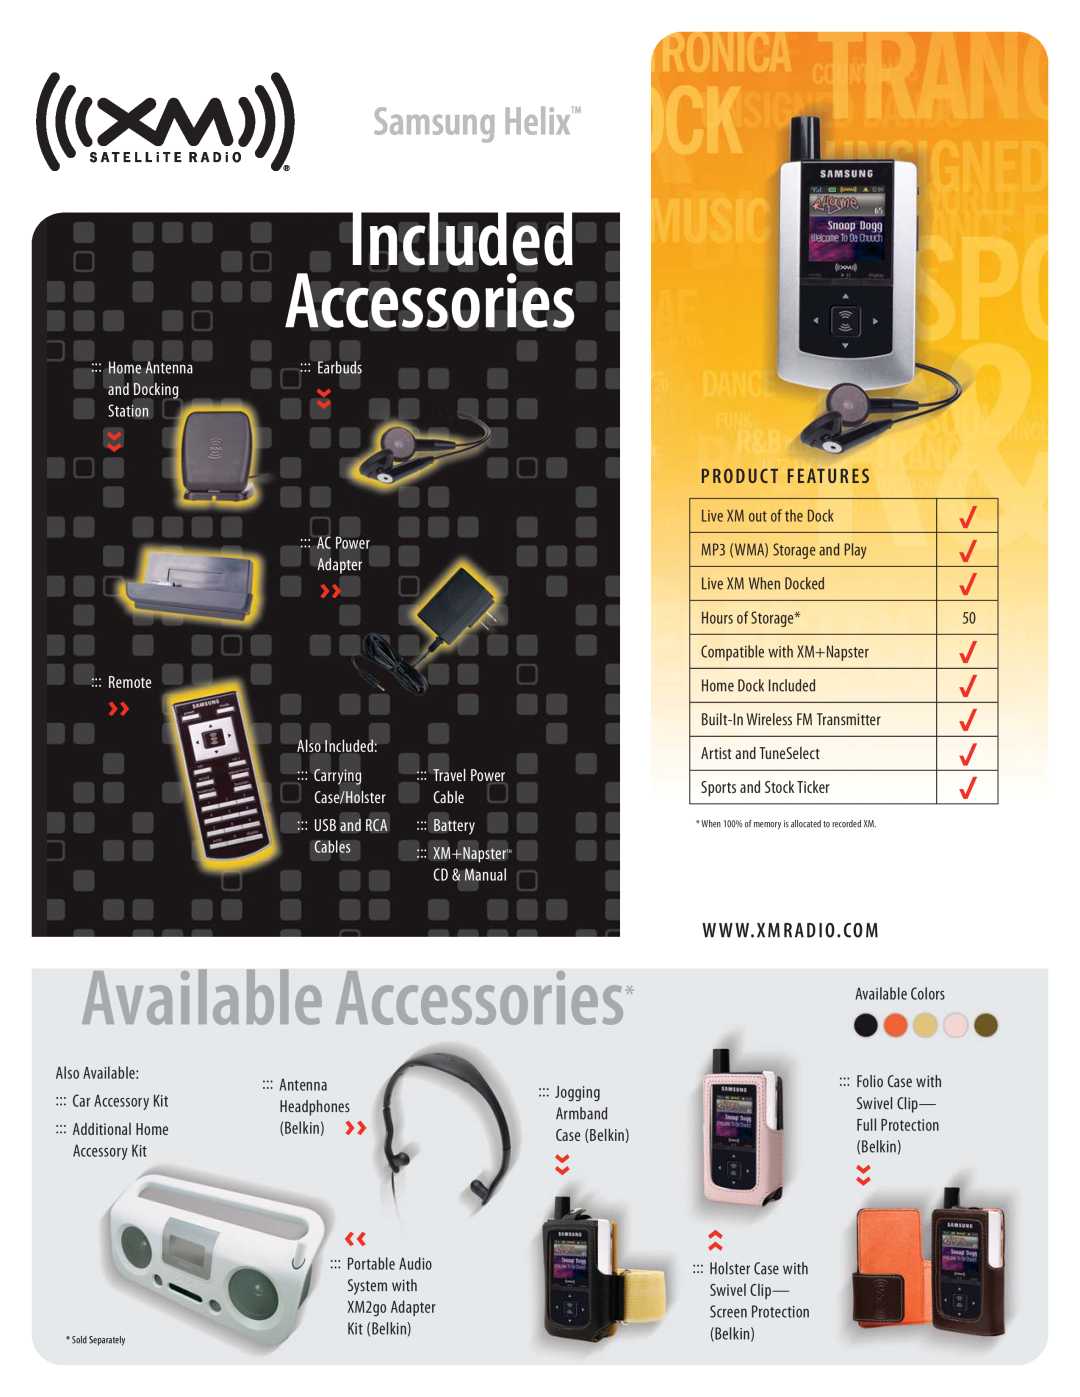 XM Satellite Radio xm2go Available Accessories, Included Accessories, Samsung HelixTM, Produc T Features, Remote, Earbuds 